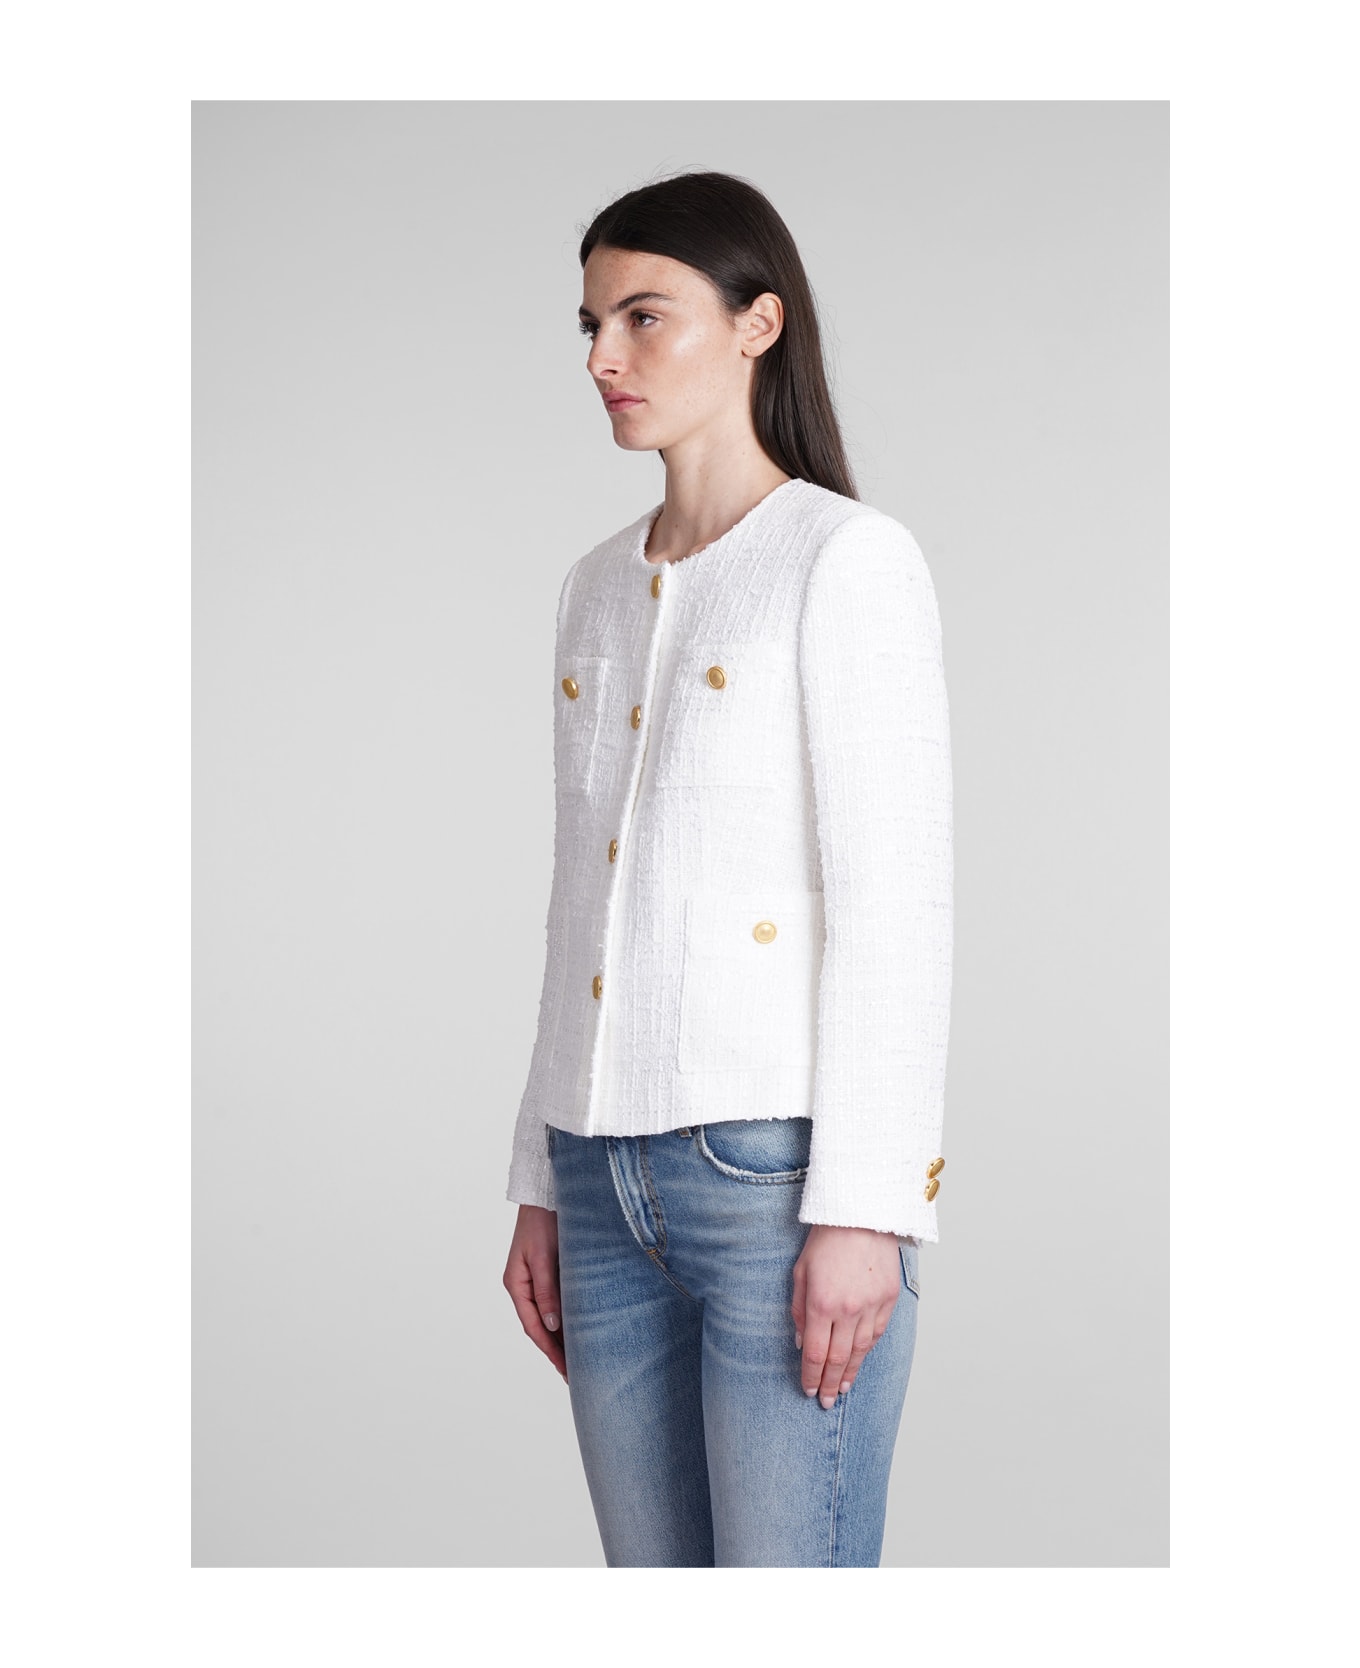 Tagliatore 0205 Beverly Casual Jacket In White Cotton - white カーディガン